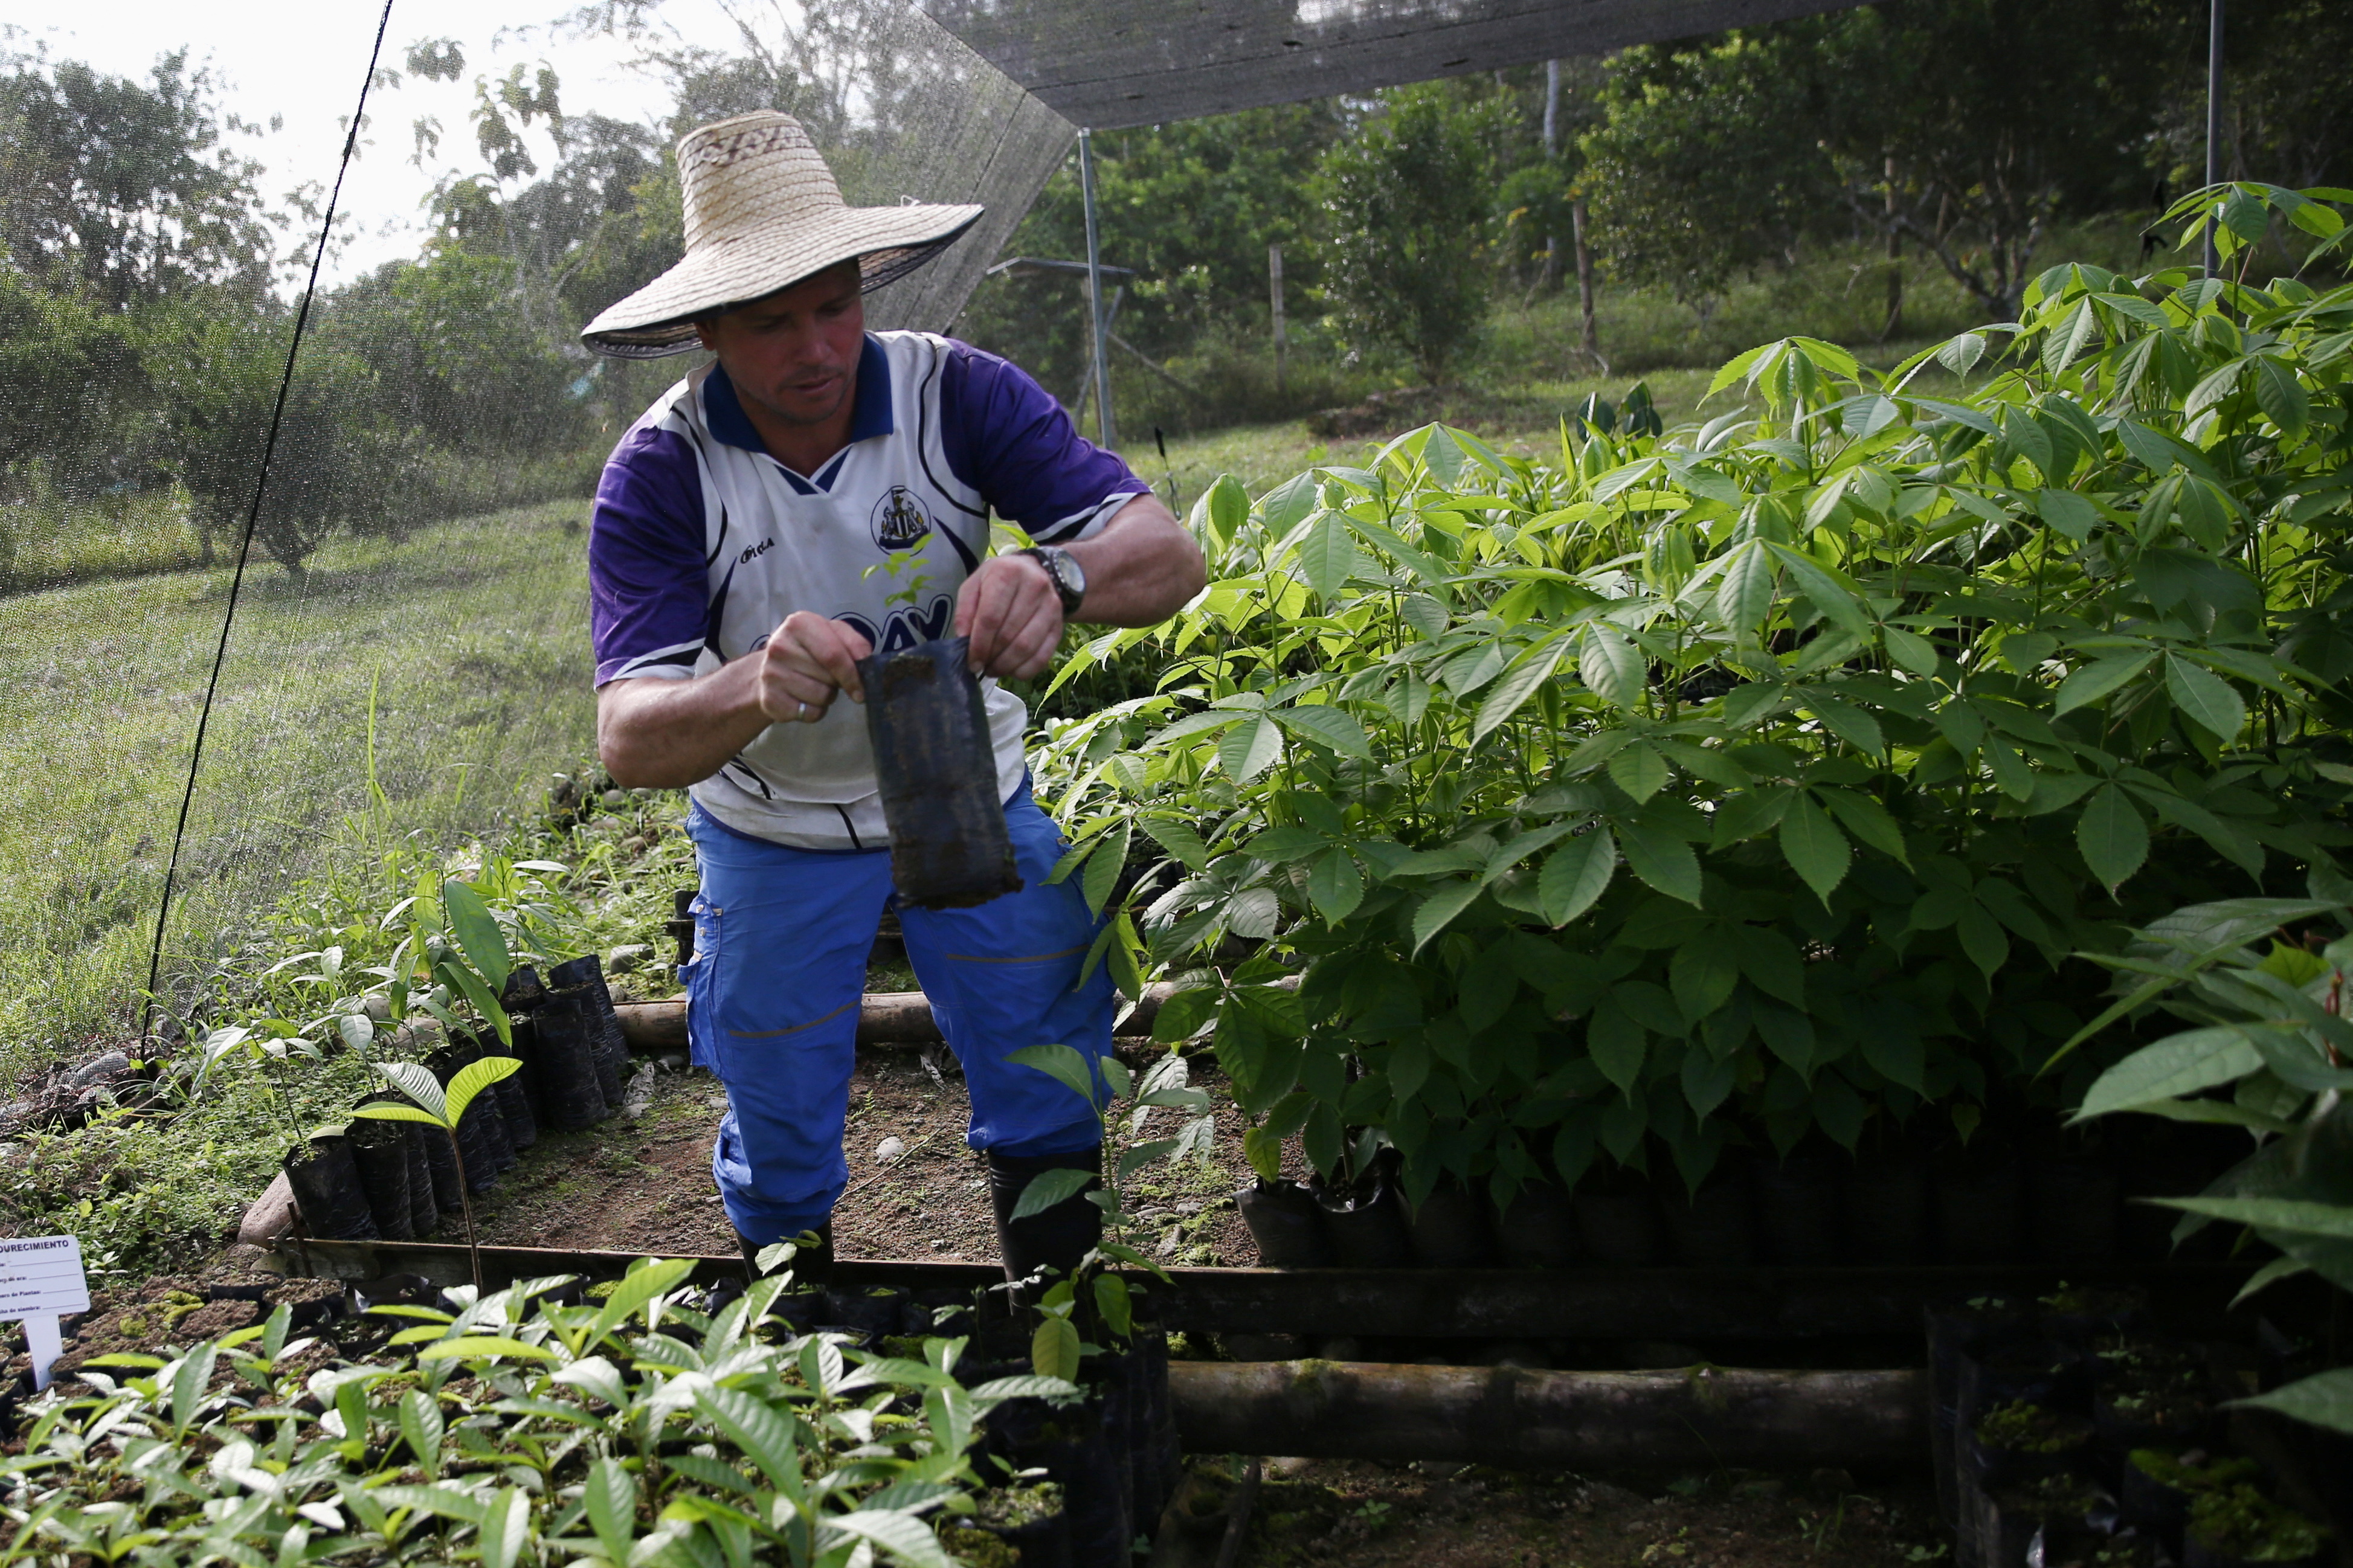 Rafael Santofimio, former FARC guerrilla, nurseryman and signatory of the peace agreement with the government of Juan Manuel Santos, holds a seedling during a visit to one of the nurseries managed by former FARC guerrillas in Putumayo